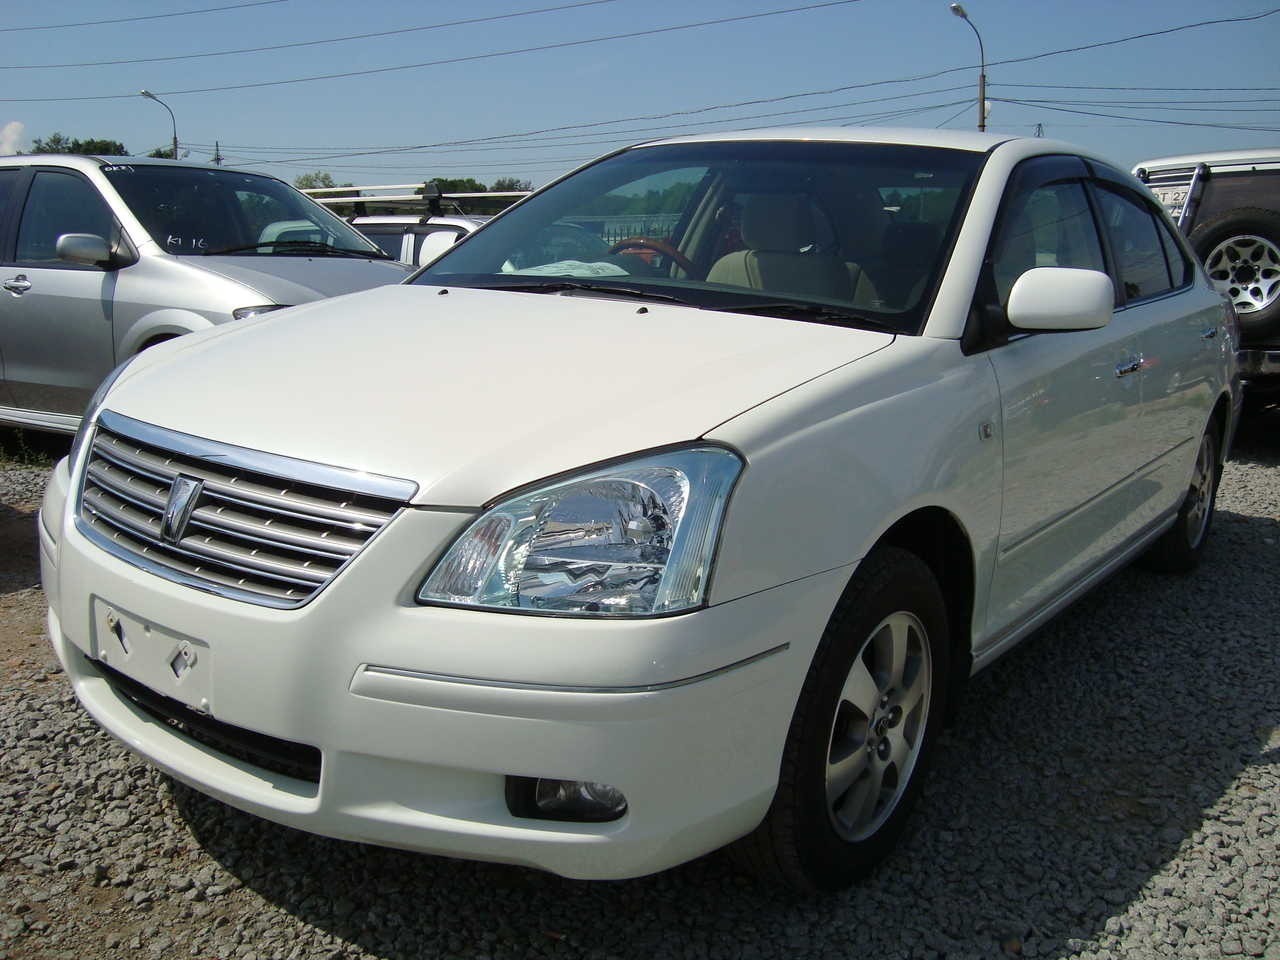 car japan used By from